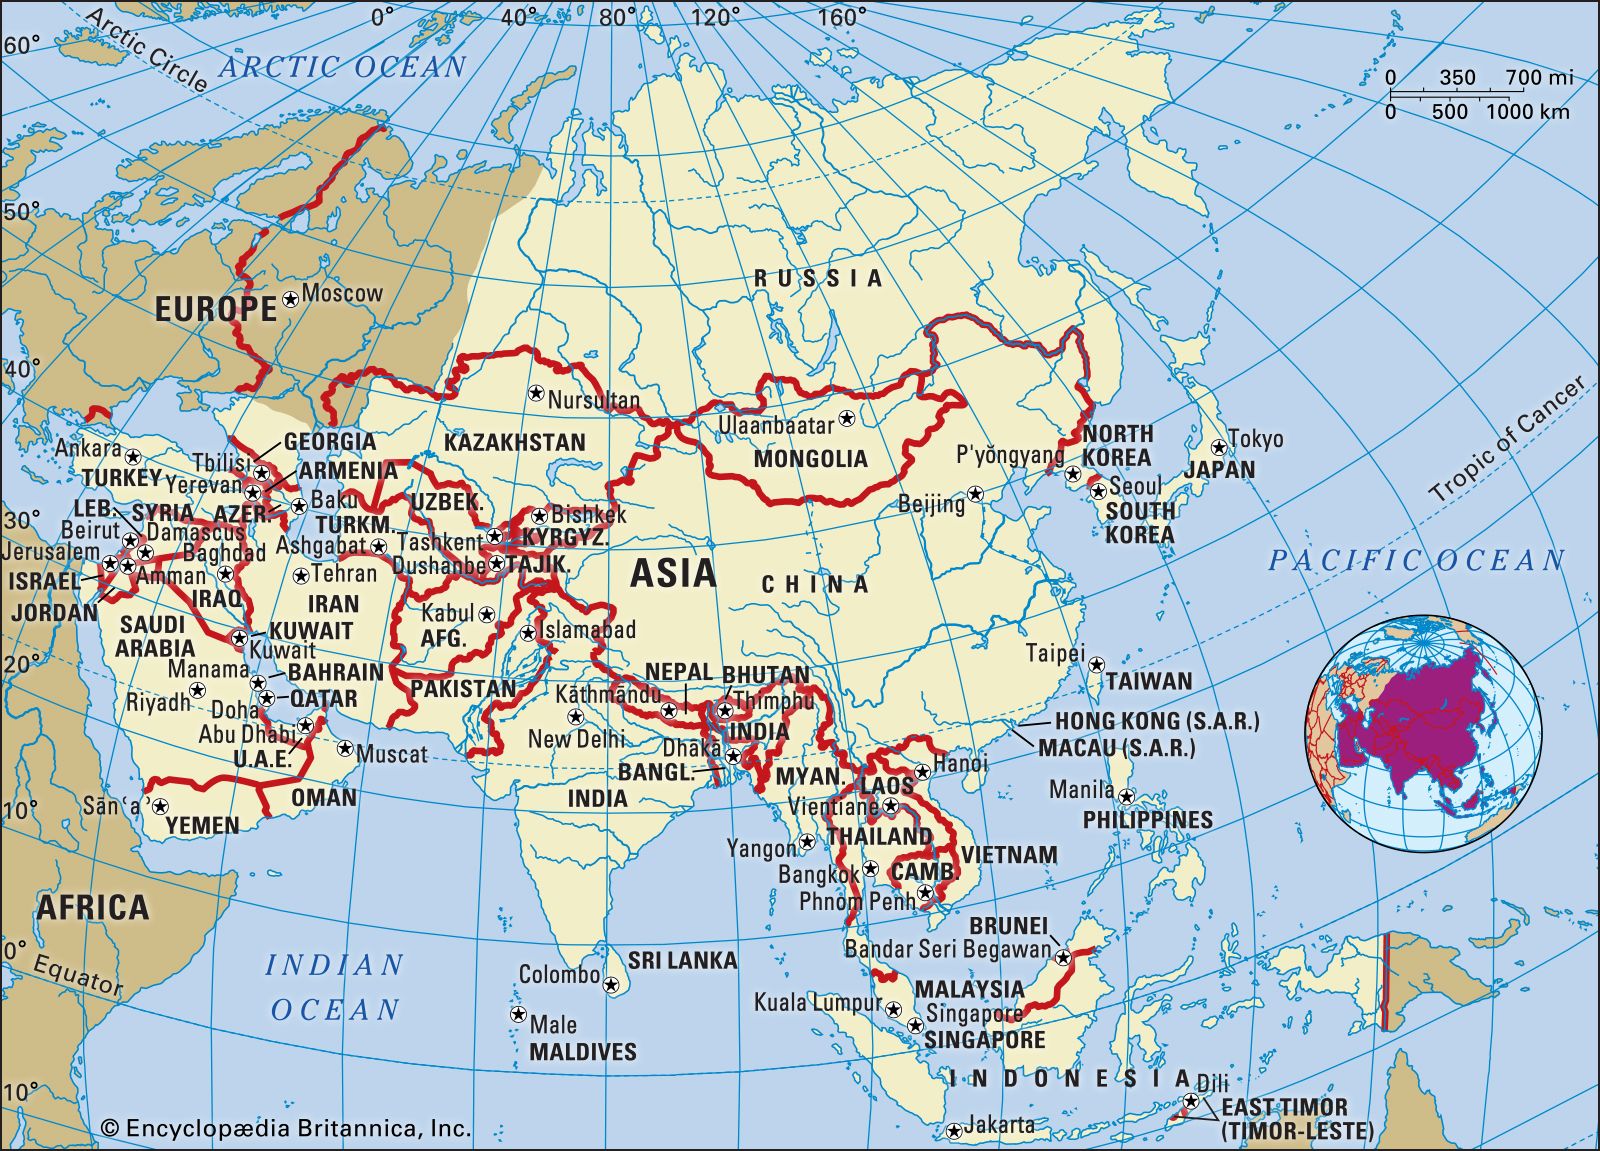 Asia. Continent, Countries, Regions, Map, & Facts